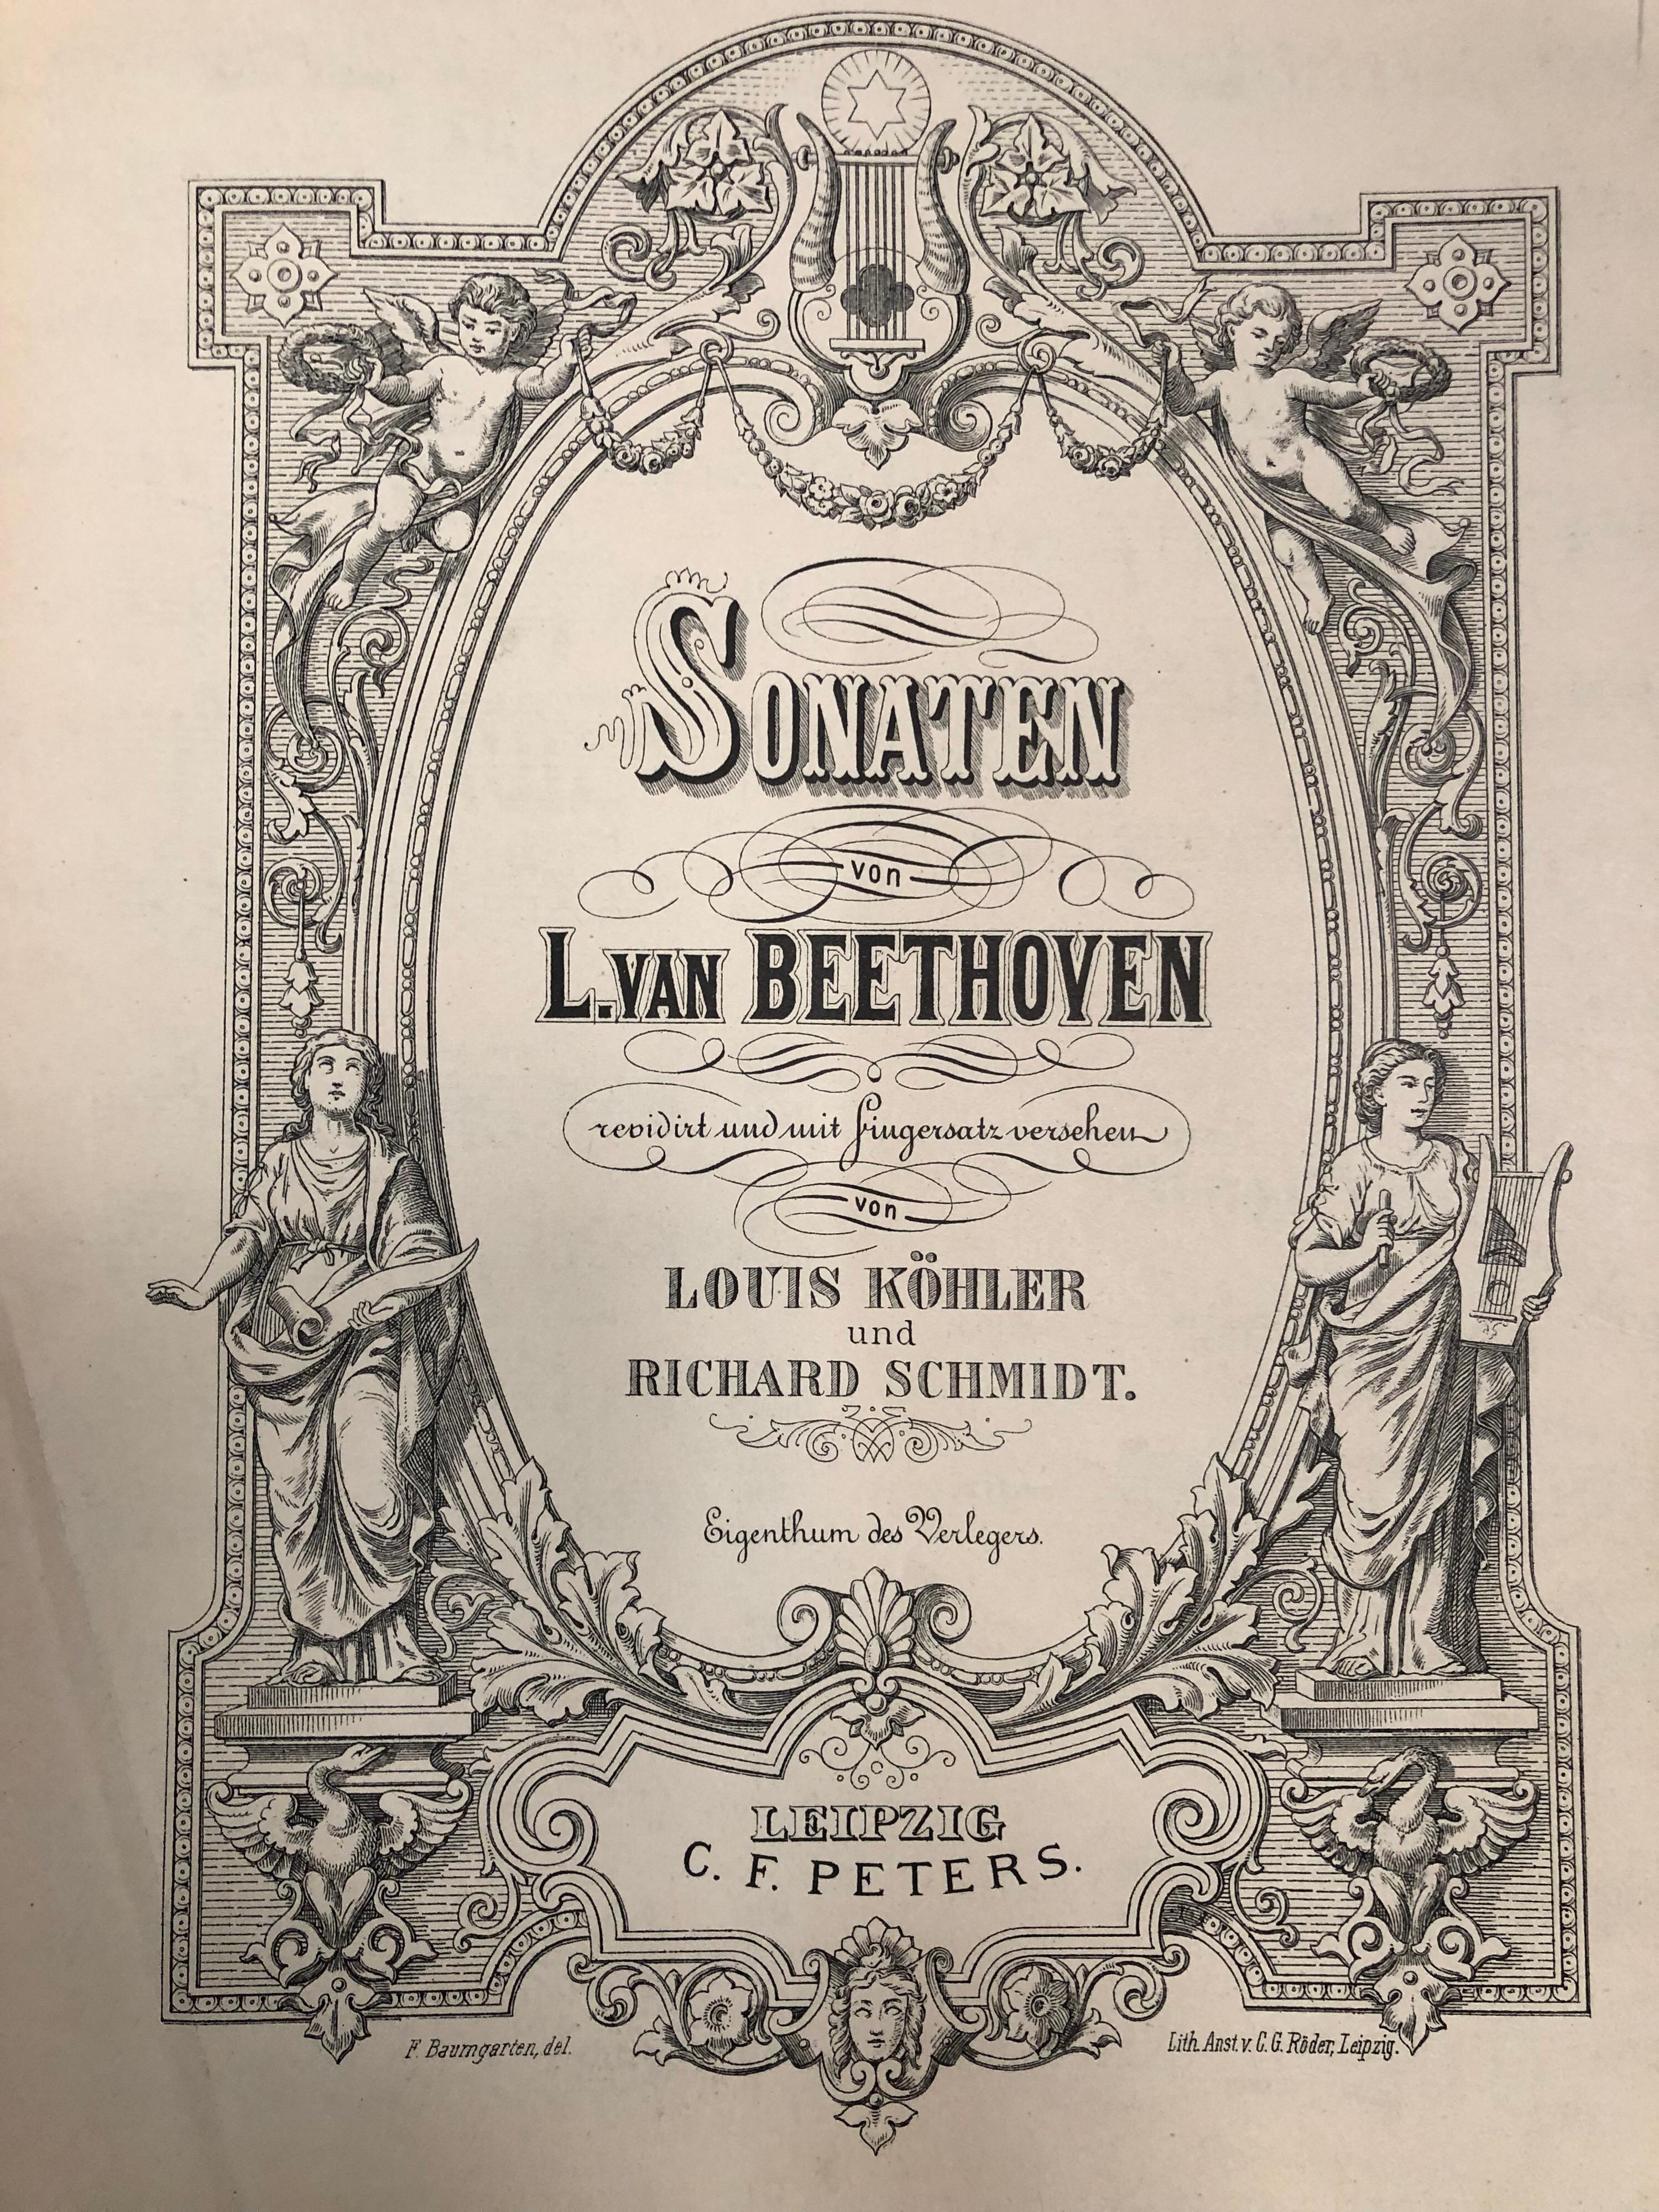 Vintage Leipzig C. F. Peters Beehoven Sonaten Sheet Music Book
Heavy dark green book with gilt gold lettering on cover. 
Title page is illustrated in brown and black.
No print date, circa late 1820 Sheet Music Book.

Heavy hardcover book with